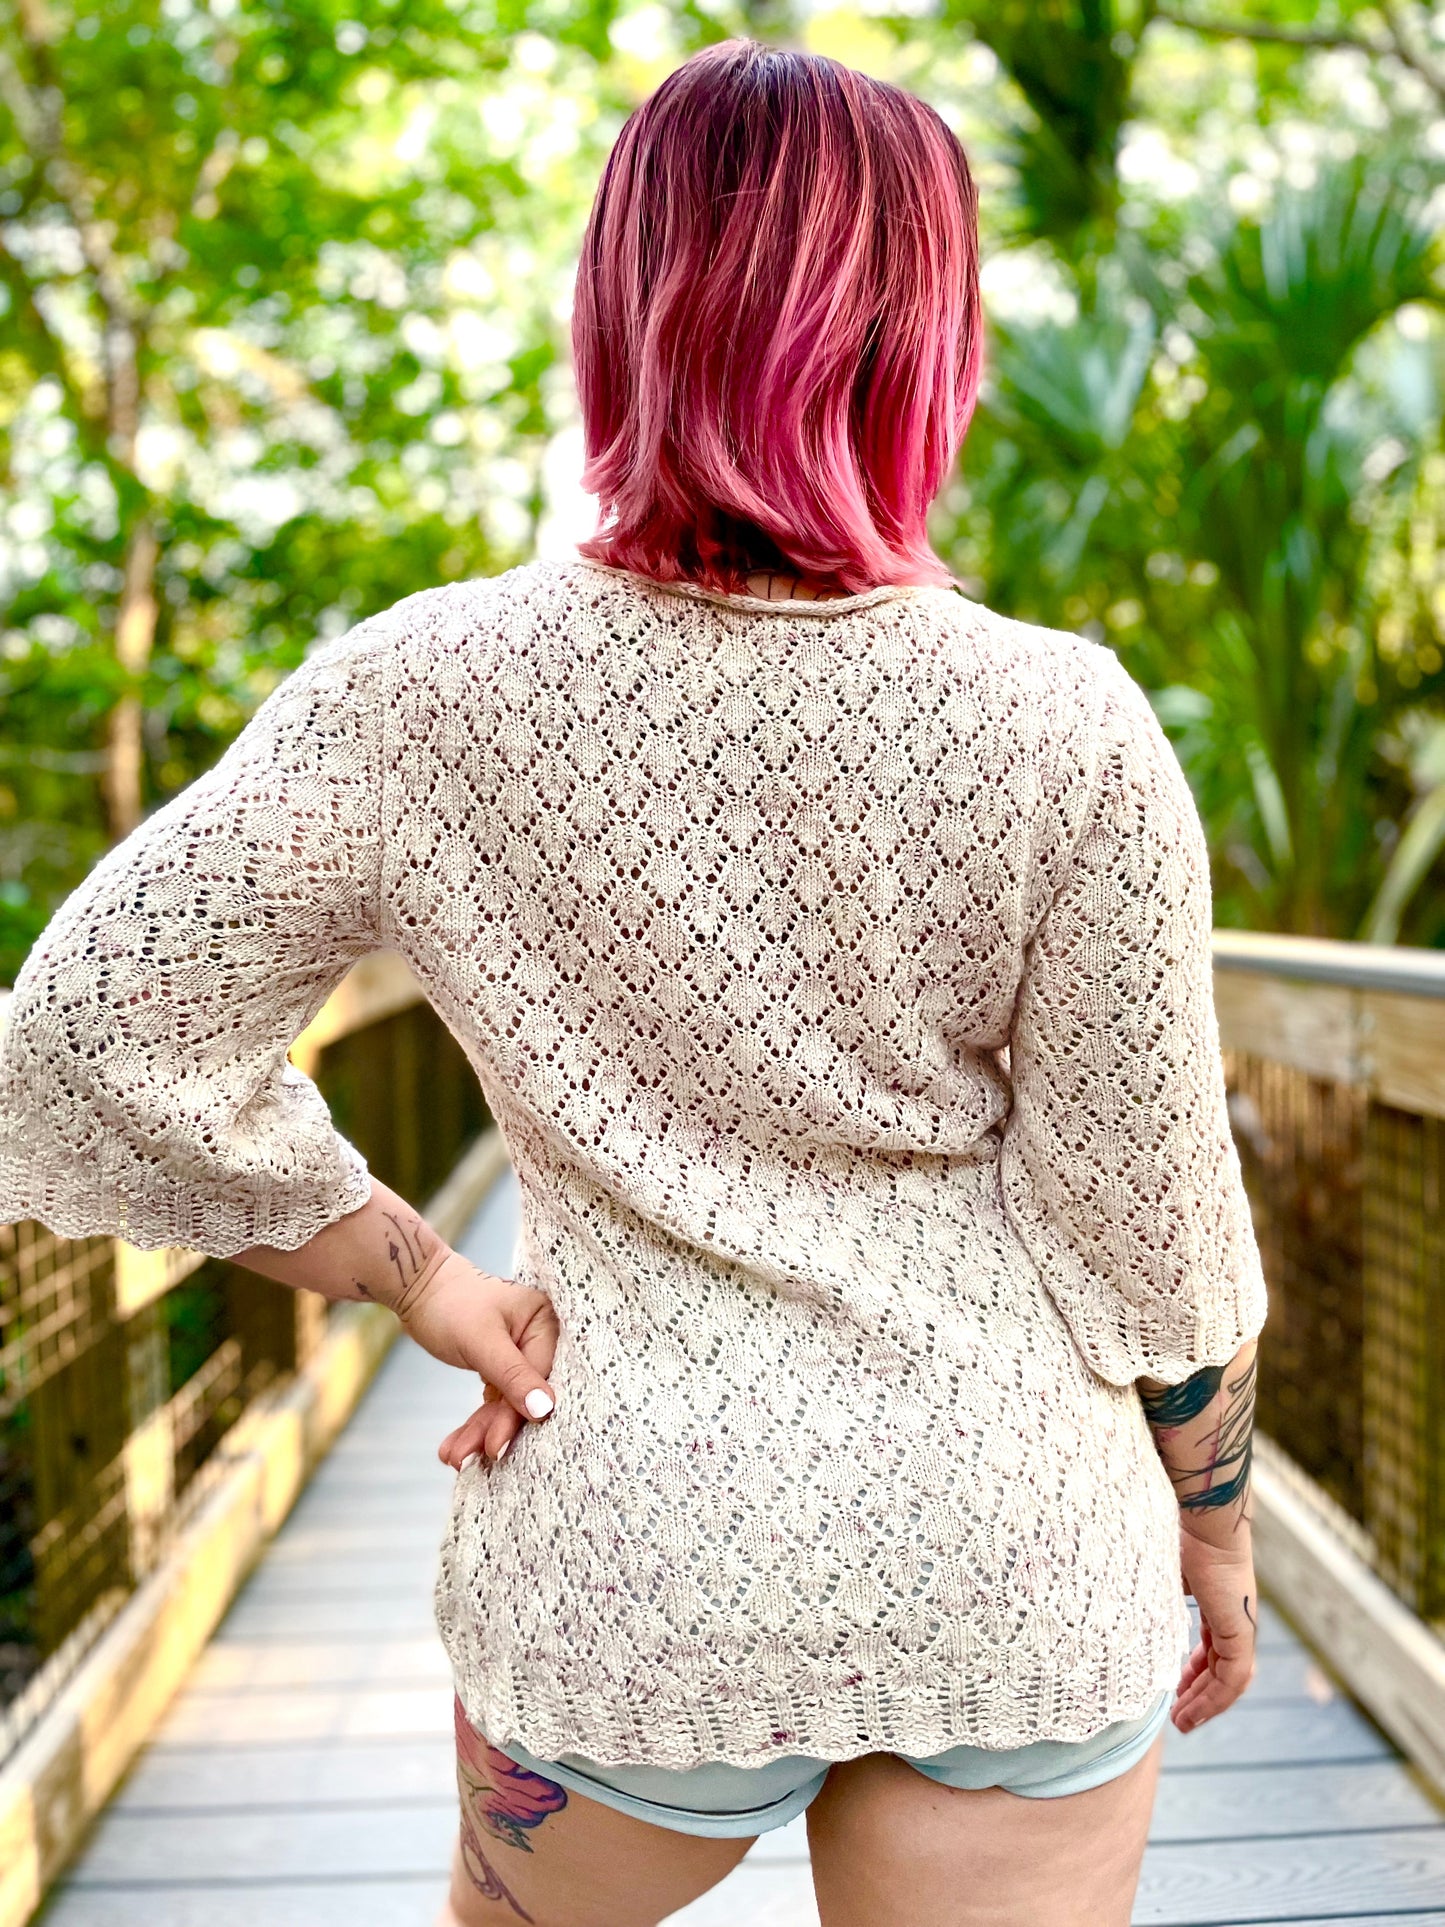 Seen from behind, Bess wears a white, light weight cardigan over denim shorts. The lacy cardigan features flared, 3/4 length sleeves and a scalloped hem. 